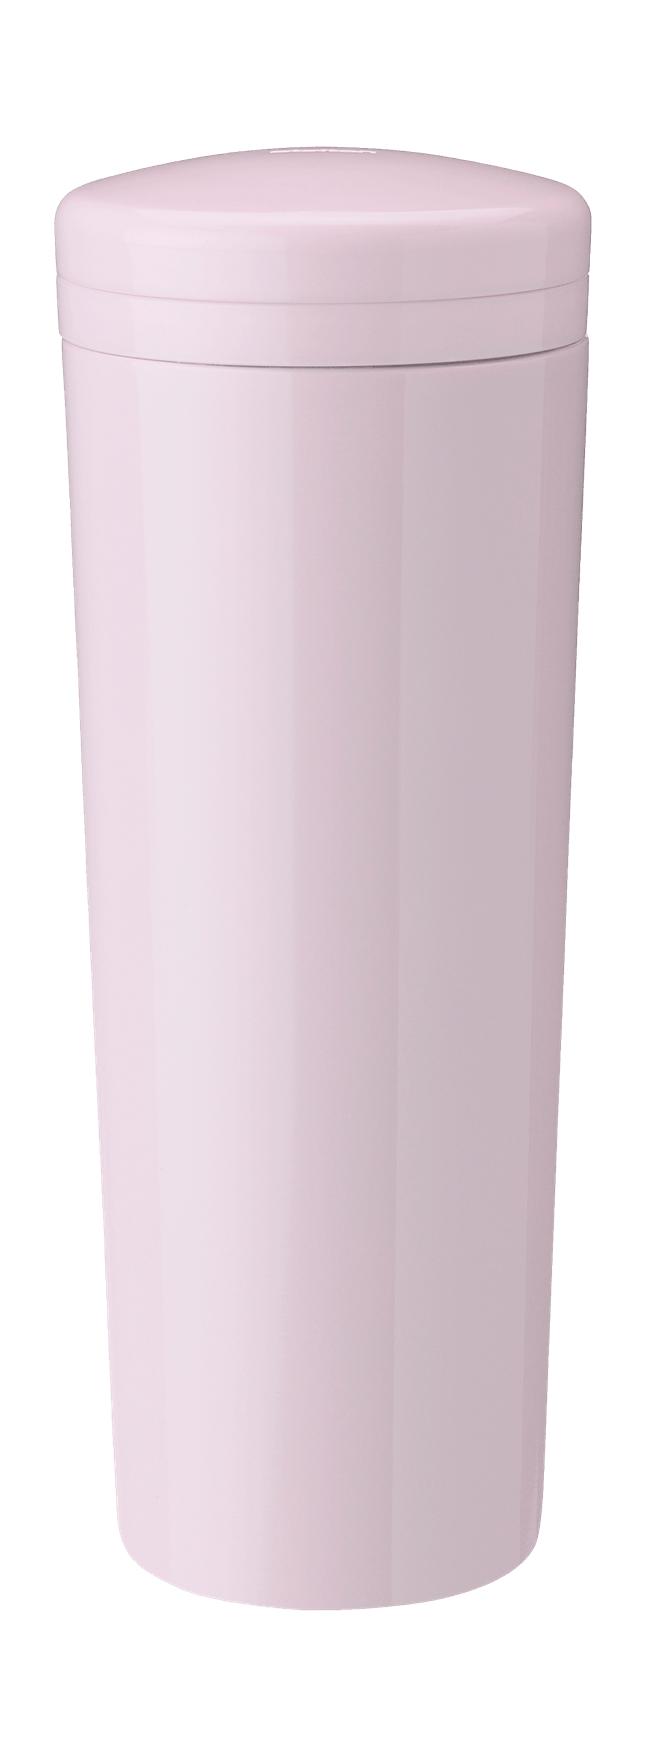 Stelton Carrie Thermos flaske 0,5 L, Rose